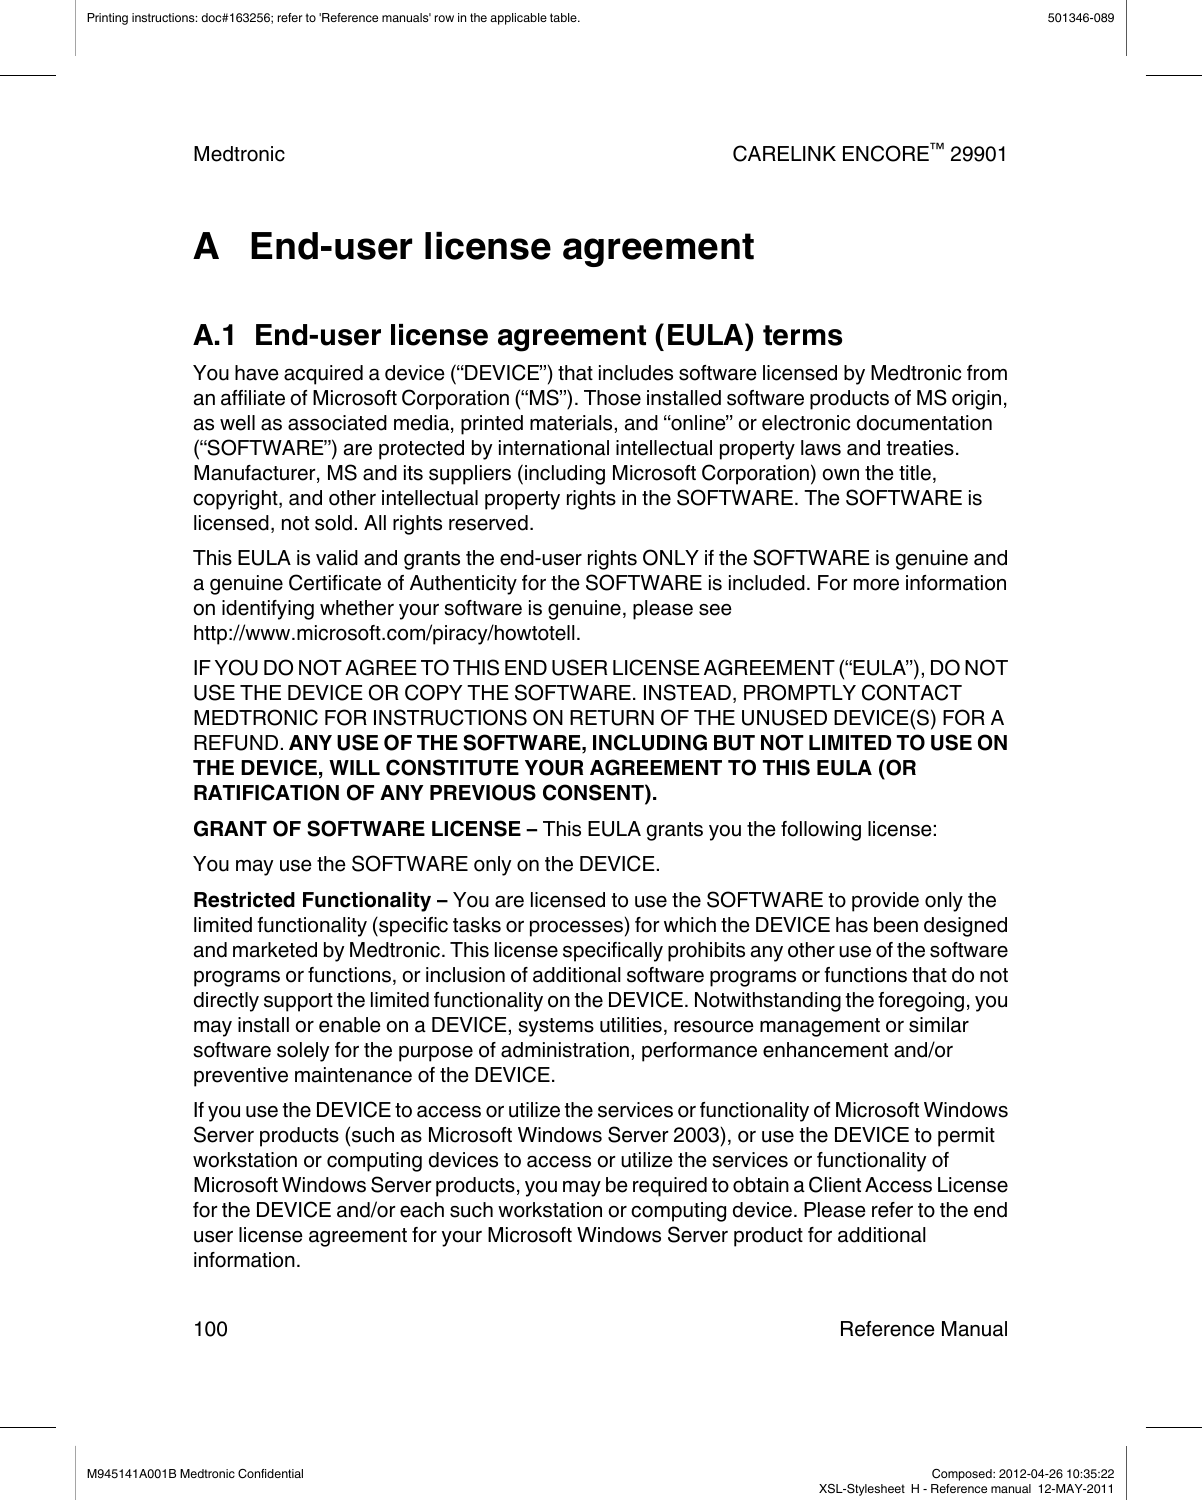 A   End-user license agreementA.1  End-user license agreement (EULA) termsYou have acquired a device (“DEVICE”) that includes software licensed by Medtronic froman affiliate of Microsoft Corporation (“MS”). Those installed software products of MS origin,as well as associated media, printed materials, and “online” or electronic documentation(“SOFTWARE”) are protected by international intellectual property laws and treaties.Manufacturer, MS and its suppliers (including Microsoft Corporation) own the title,copyright, and other intellectual property rights in the SOFTWARE. The SOFTWARE islicensed, not sold. All rights reserved.This EULA is valid and grants the end-user rights ONLY if the SOFTWARE is genuine anda genuine Certificate of Authenticity for the SOFTWARE is included. For more informationon identifying whether your software is genuine, please seehttp://www.microsoft.com/piracy/howtotell.IF YOU DO NOT AGREE TO THIS END USER LICENSE AGREEMENT (“EULA”), DO NOTUSE THE DEVICE OR COPY THE SOFTWARE. INSTEAD, PROMPTLY CONTACTMEDTRONIC FOR INSTRUCTIONS ON RETURN OF THE UNUSED DEVICE(S) FOR AREFUND. ANY USE OF THE SOFTWARE, INCLUDING BUT NOT LIMITED TO USE ONTHE DEVICE, WILL CONSTITUTE YOUR AGREEMENT TO THIS EULA (ORRATIFICATION OF ANY PREVIOUS CONSENT).GRANT OF SOFTWARE LICENSE – This EULA grants you the following license:You may use the SOFTWARE only on the DEVICE.Restricted Functionality – You are licensed to use the SOFTWARE to provide only thelimited functionality (specific tasks or processes) for which the DEVICE has been designedand marketed by Medtronic. This license specifically prohibits any other use of the softwareprograms or functions, or inclusion of additional software programs or functions that do notdirectly support the limited functionality on the DEVICE. Notwithstanding the foregoing, youmay install or enable on a DEVICE, systems utilities, resource management or similarsoftware solely for the purpose of administration, performance enhancement and/orpreventive maintenance of the DEVICE.If you use the DEVICE to access or utilize the services or functionality of Microsoft WindowsServer products (such as Microsoft Windows Server 2003), or use the DEVICE to permitworkstation or computing devices to access or utilize the services or functionality ofMicrosoft Windows Server products, you may be required to obtain a Client Access Licensefor the DEVICE and/or each such workstation or computing device. Please refer to the enduser license agreement for your Microsoft Windows Server product for additionalinformation.Printing instructions: doc#163256; refer to &apos;Reference manuals&apos; row in the applicable table. 501346-089Medtronic CARELINK ENCORE™ 29901100 Reference ManualM945141A001B Medtronic Confidential   Composed: 2012-04-26 10:35:22XSL-Stylesheet  H - Reference manual  12-MAY-2011